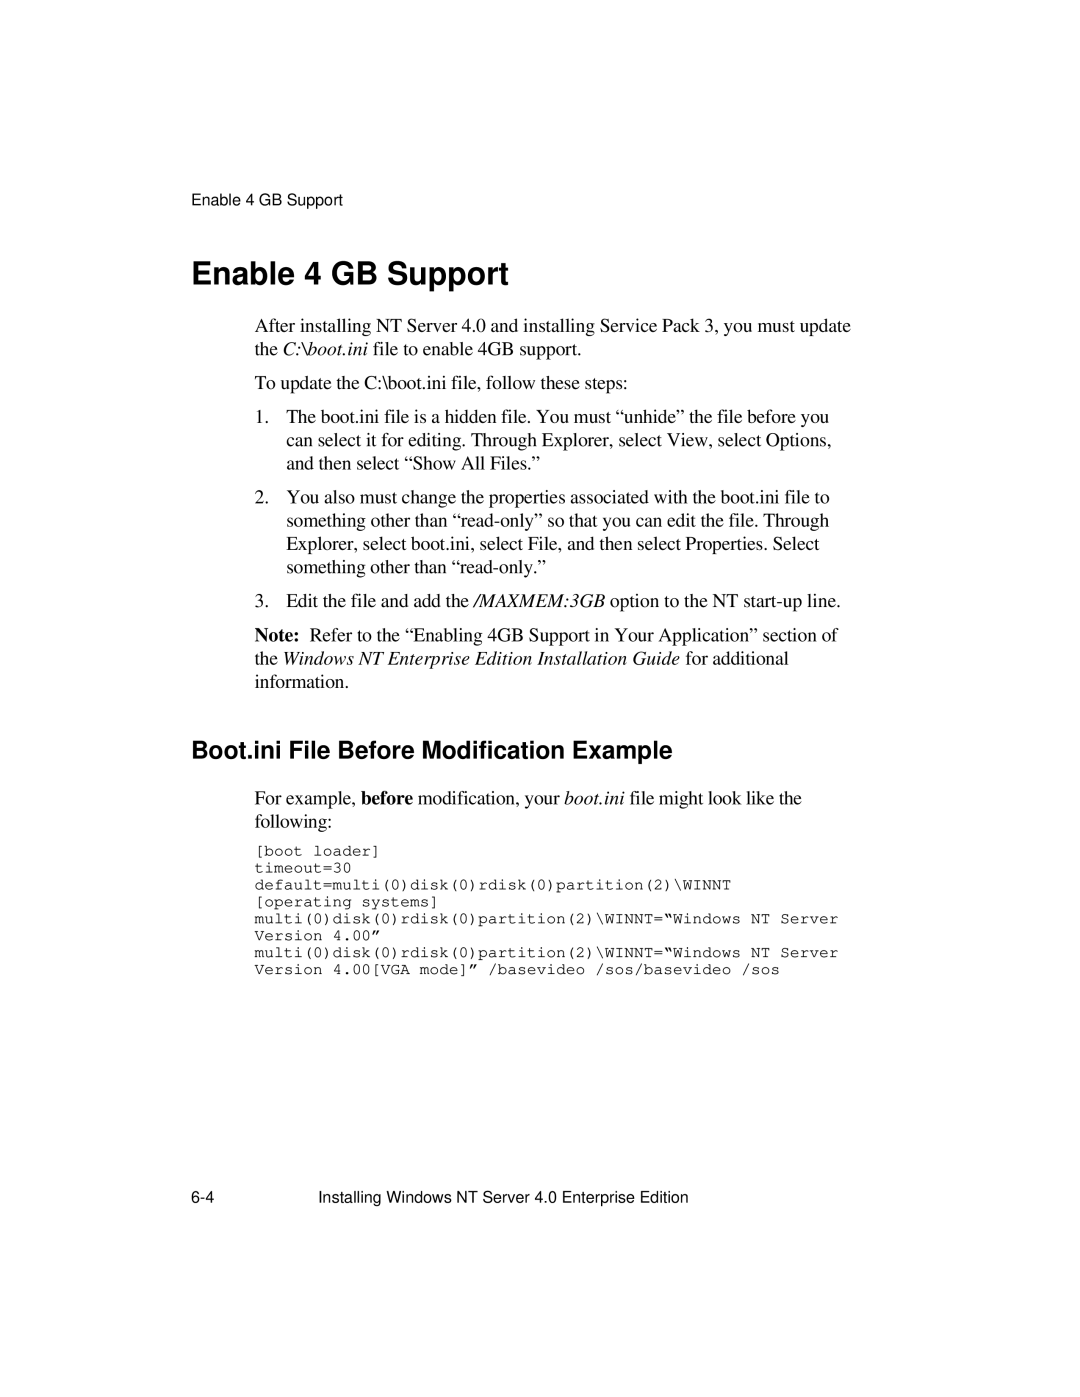 NCR S16 manual Enable 4 GB Support, Boot.ini File Before Modification Example 